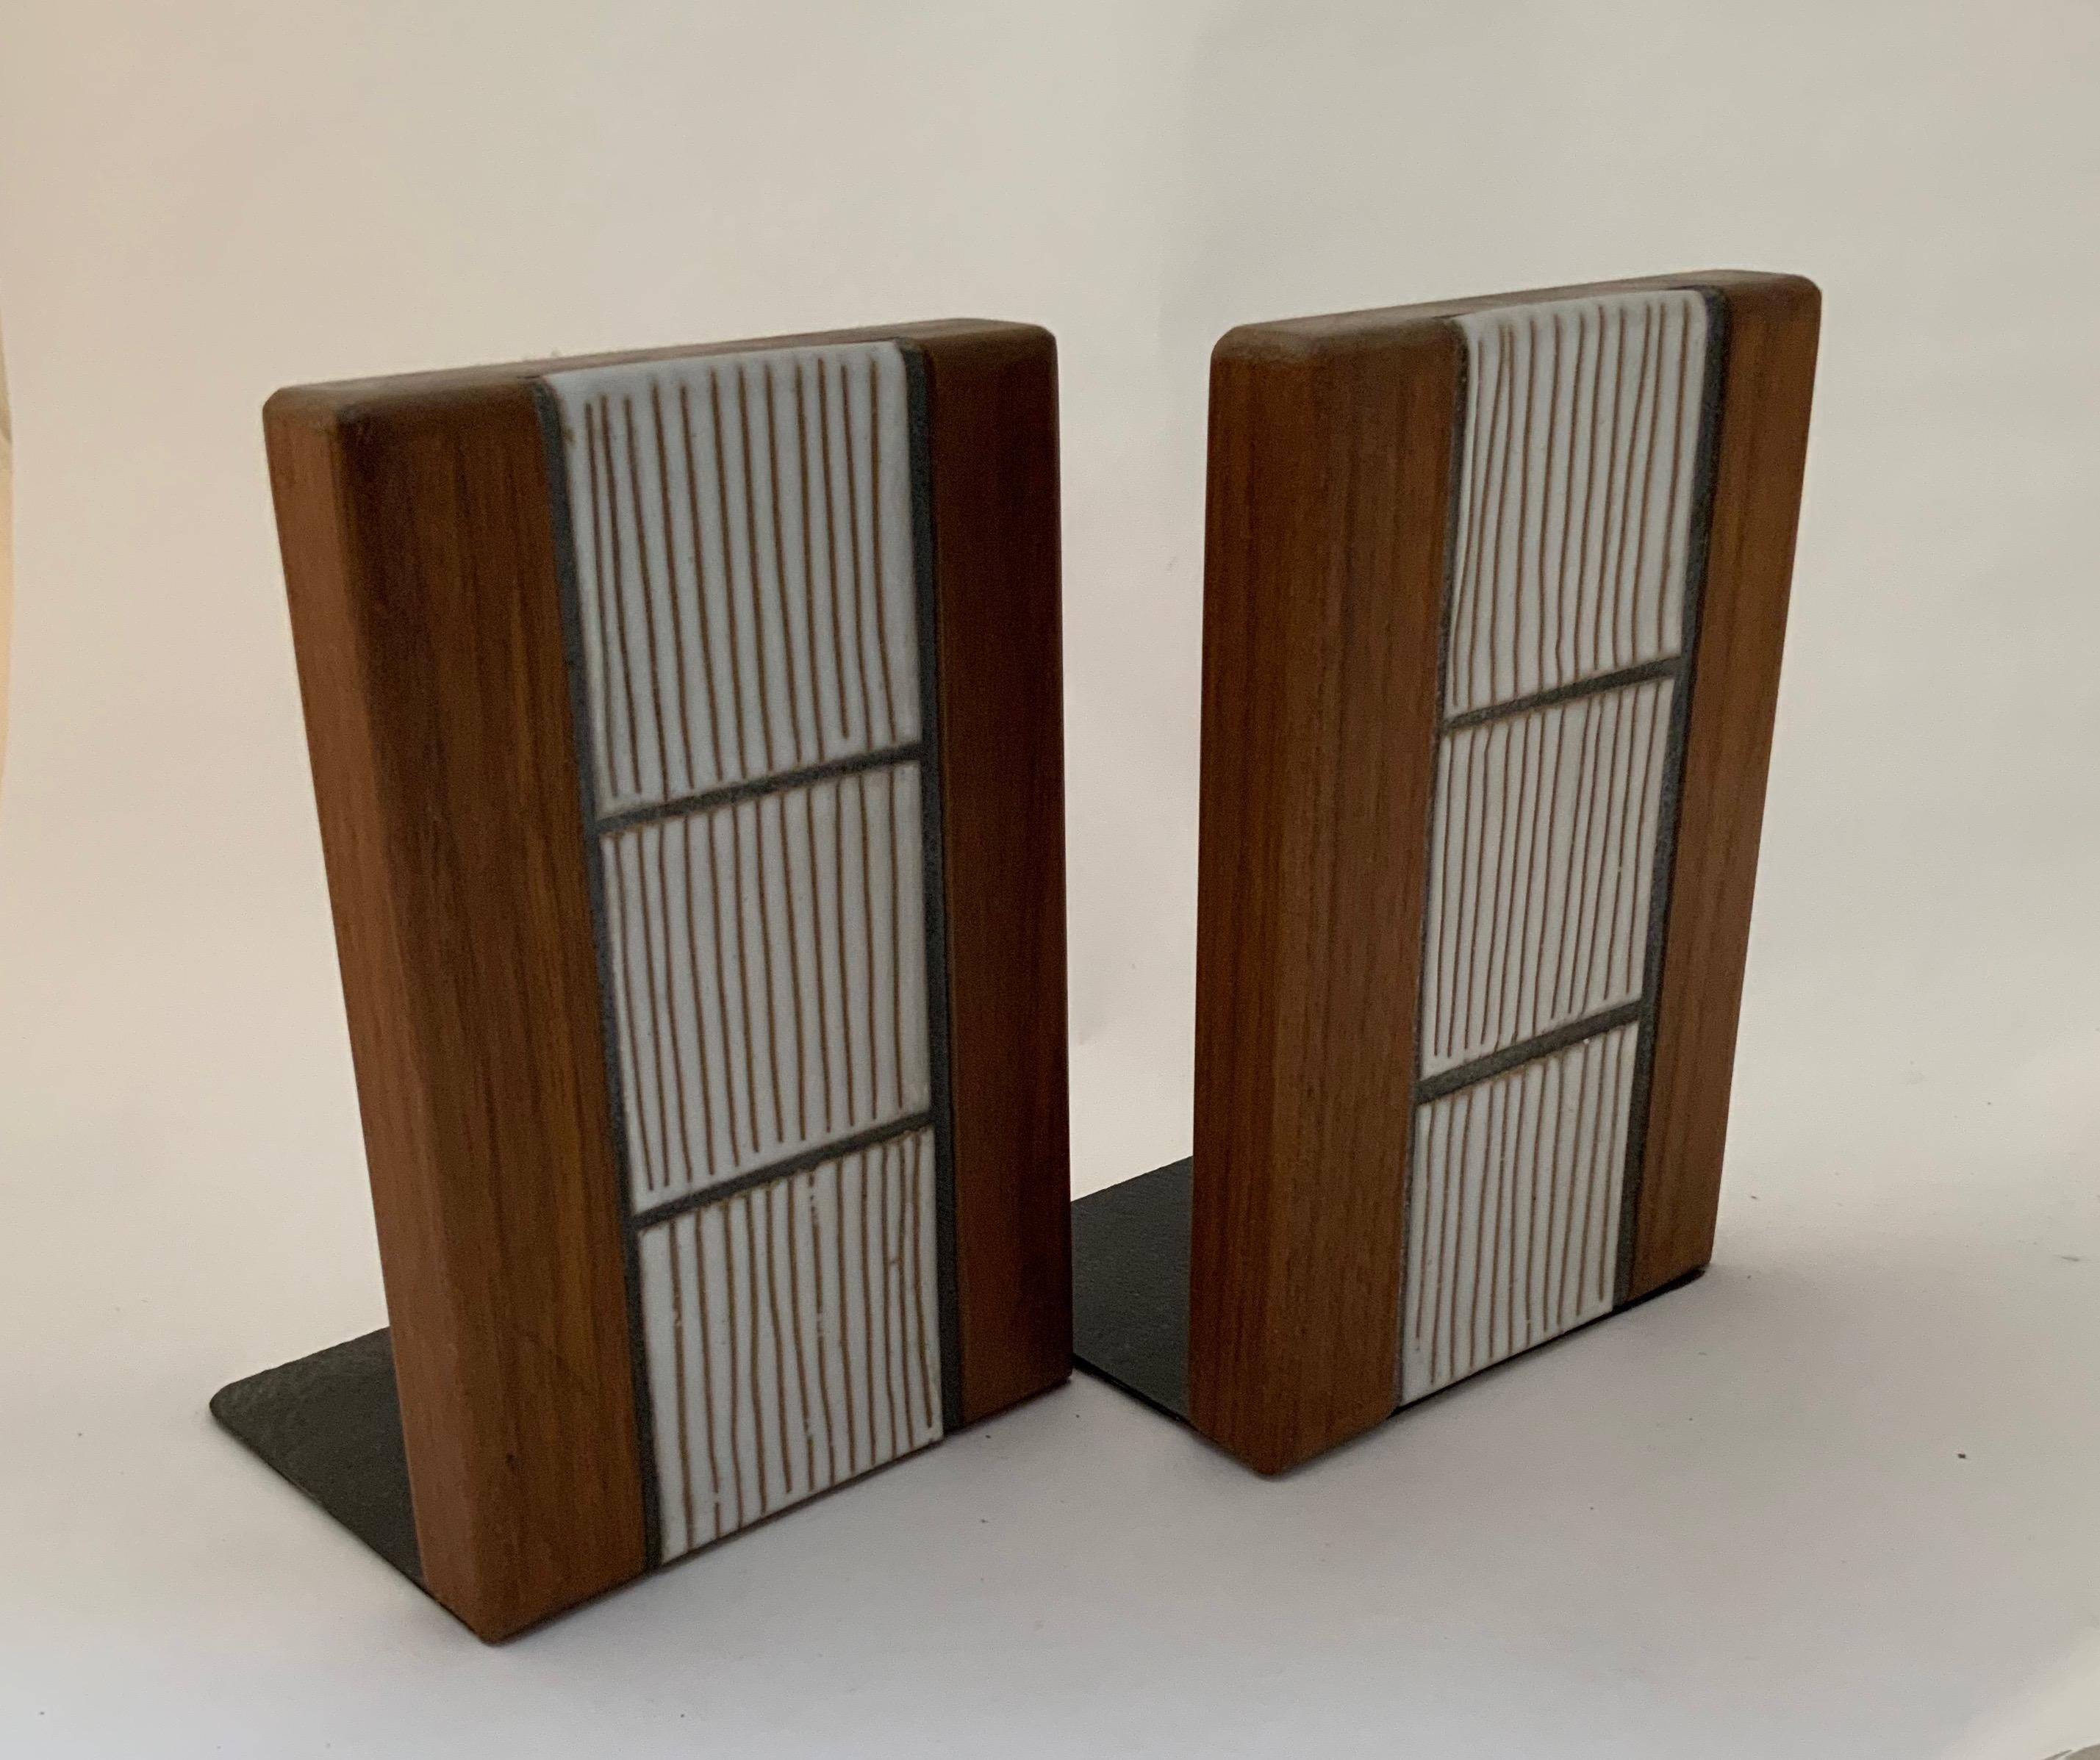 Pair of solid walnut and ceramic tile bookends by Marshall Studios/Martz. Matte glazed tiles with incised line decoration, circa 1950-1960. Unsigned. Very good condition.

Measures: Approximately 1